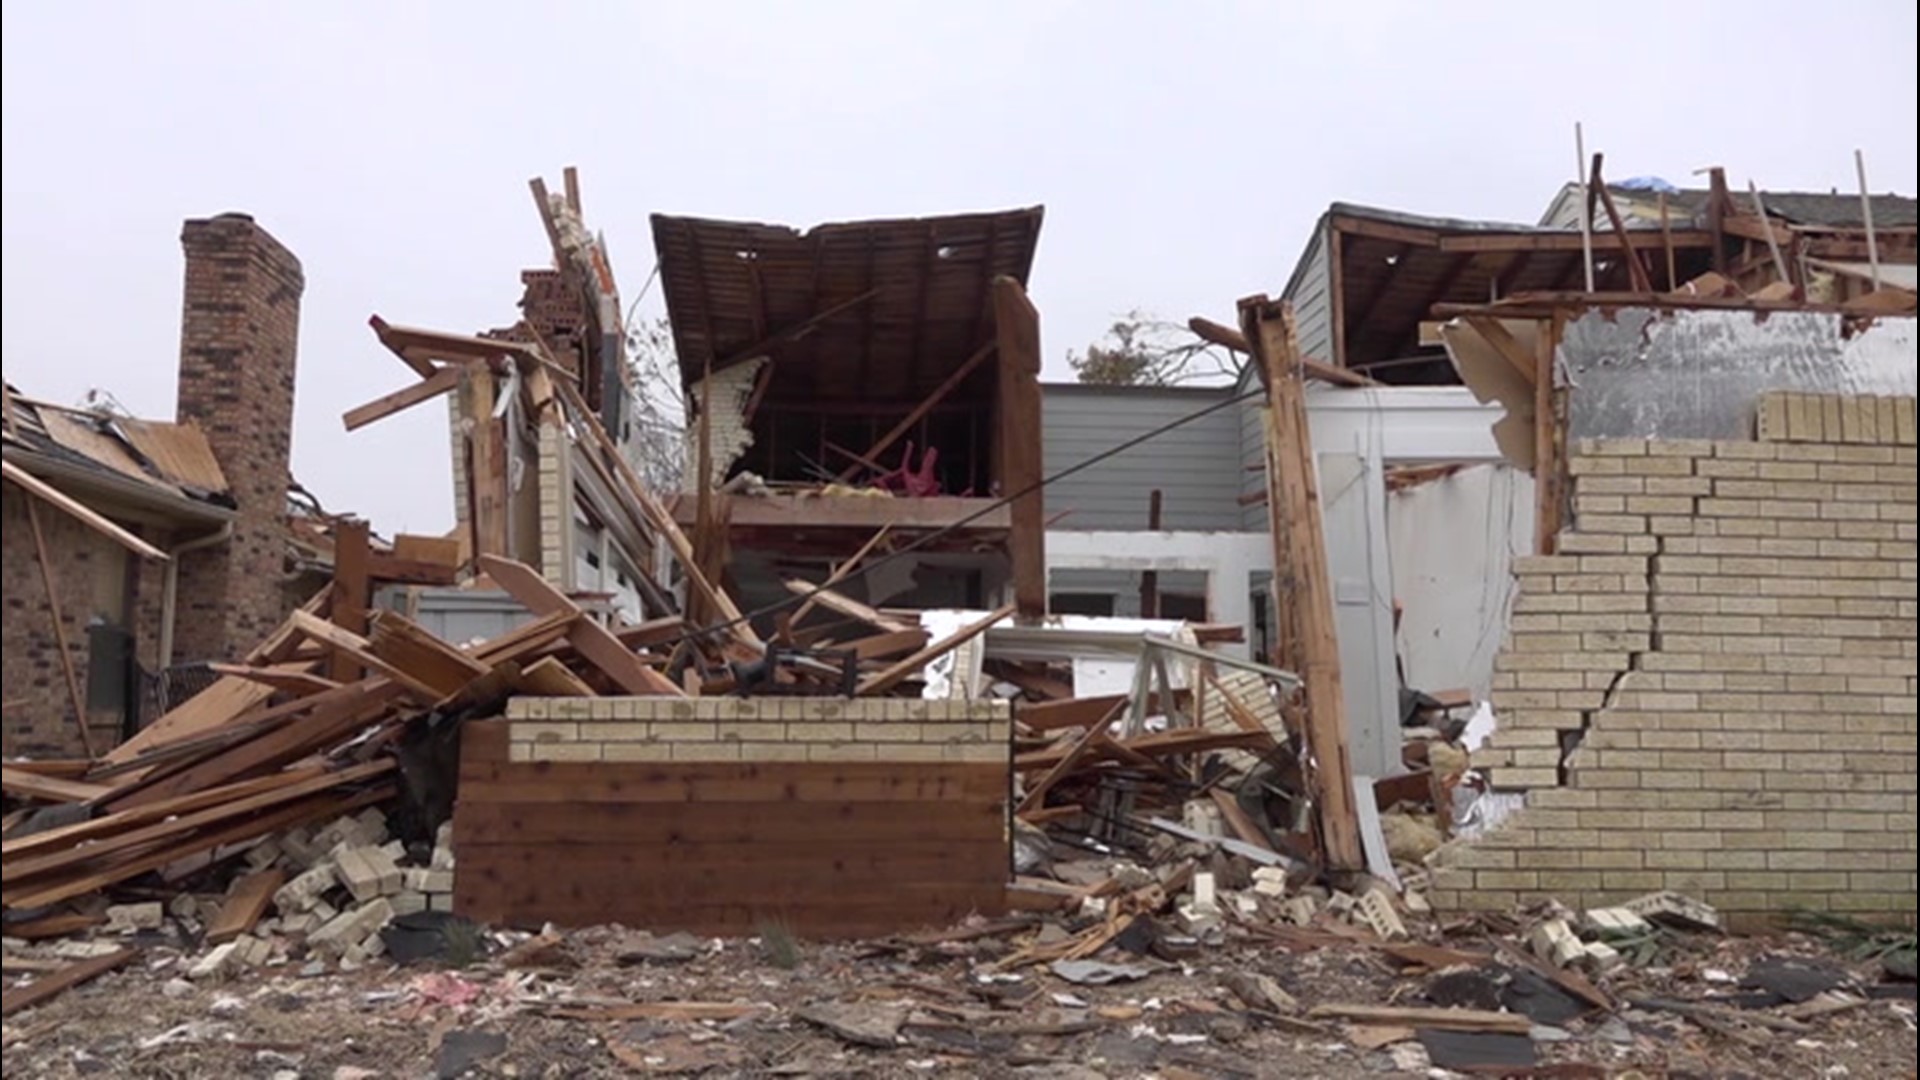 Insurance adjusters are still crunching the numbers after the Texas tornado outbreak in October. AccuWeather's Bill Wadell looks at the damage estimates and technology that helped save lives.